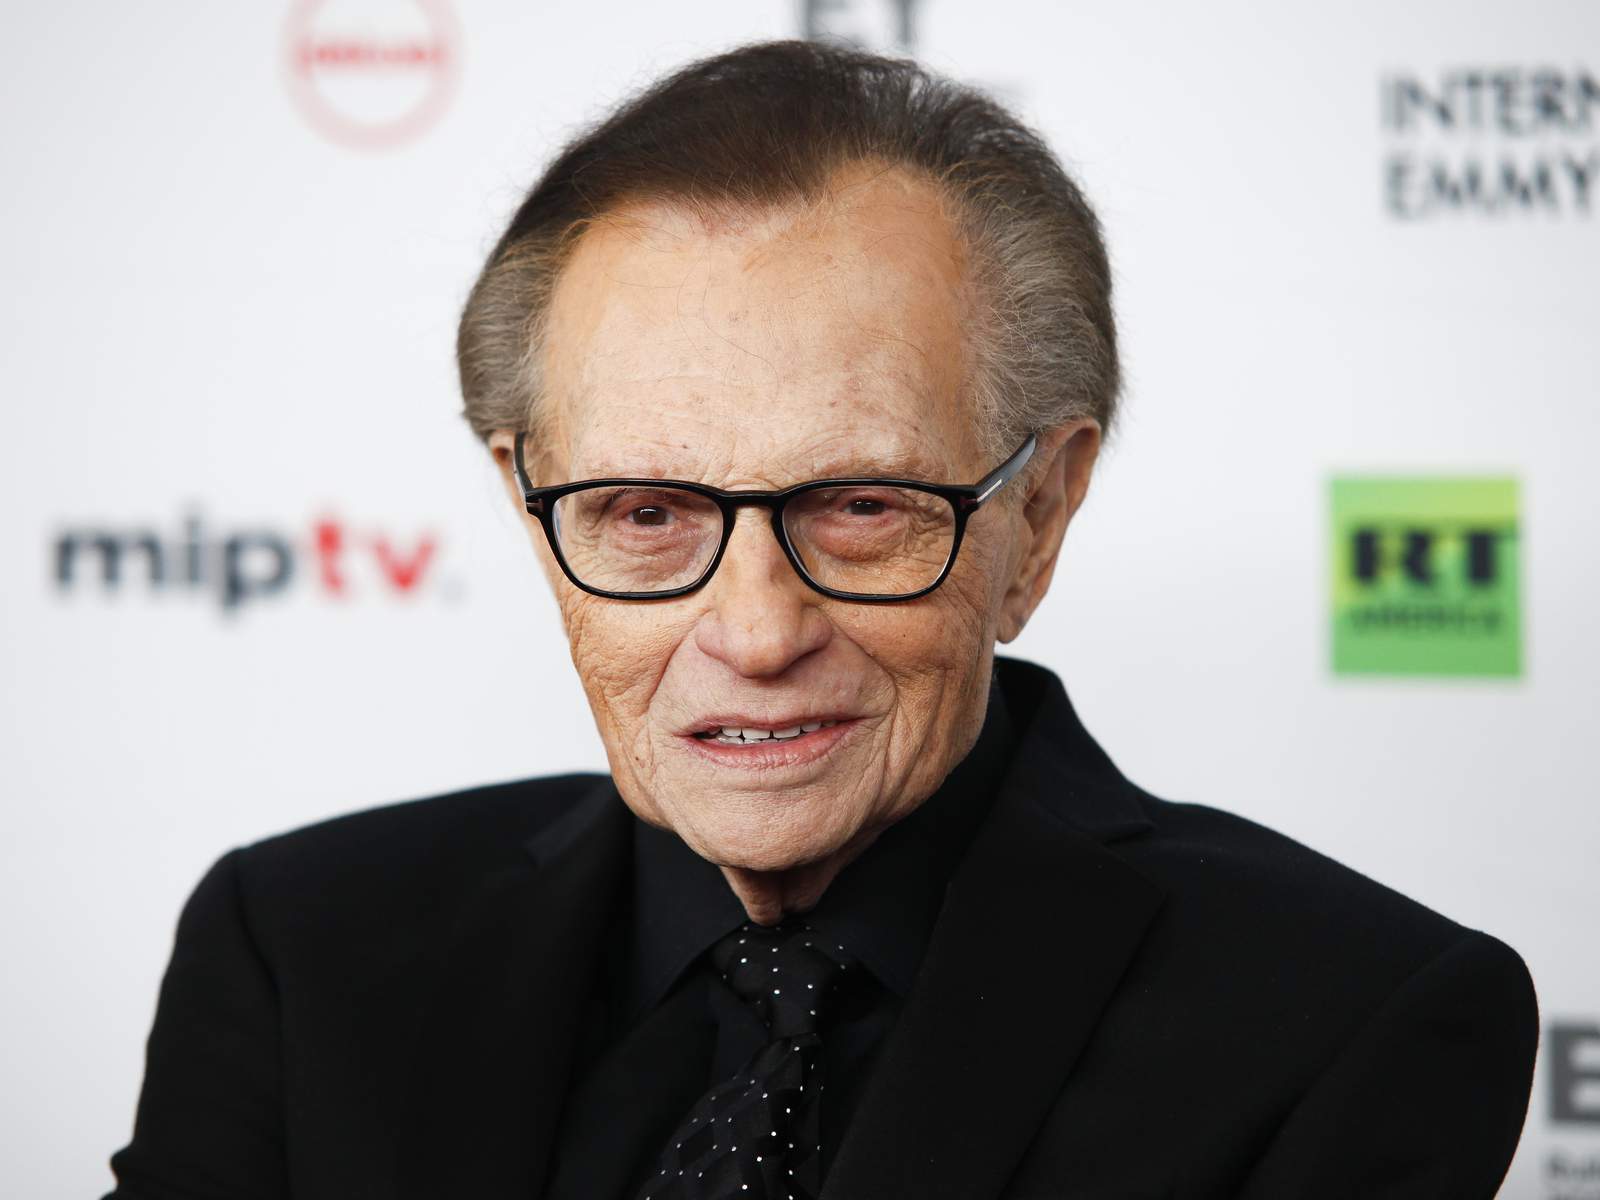 Iconic American television and radio host Larry King dies at 87